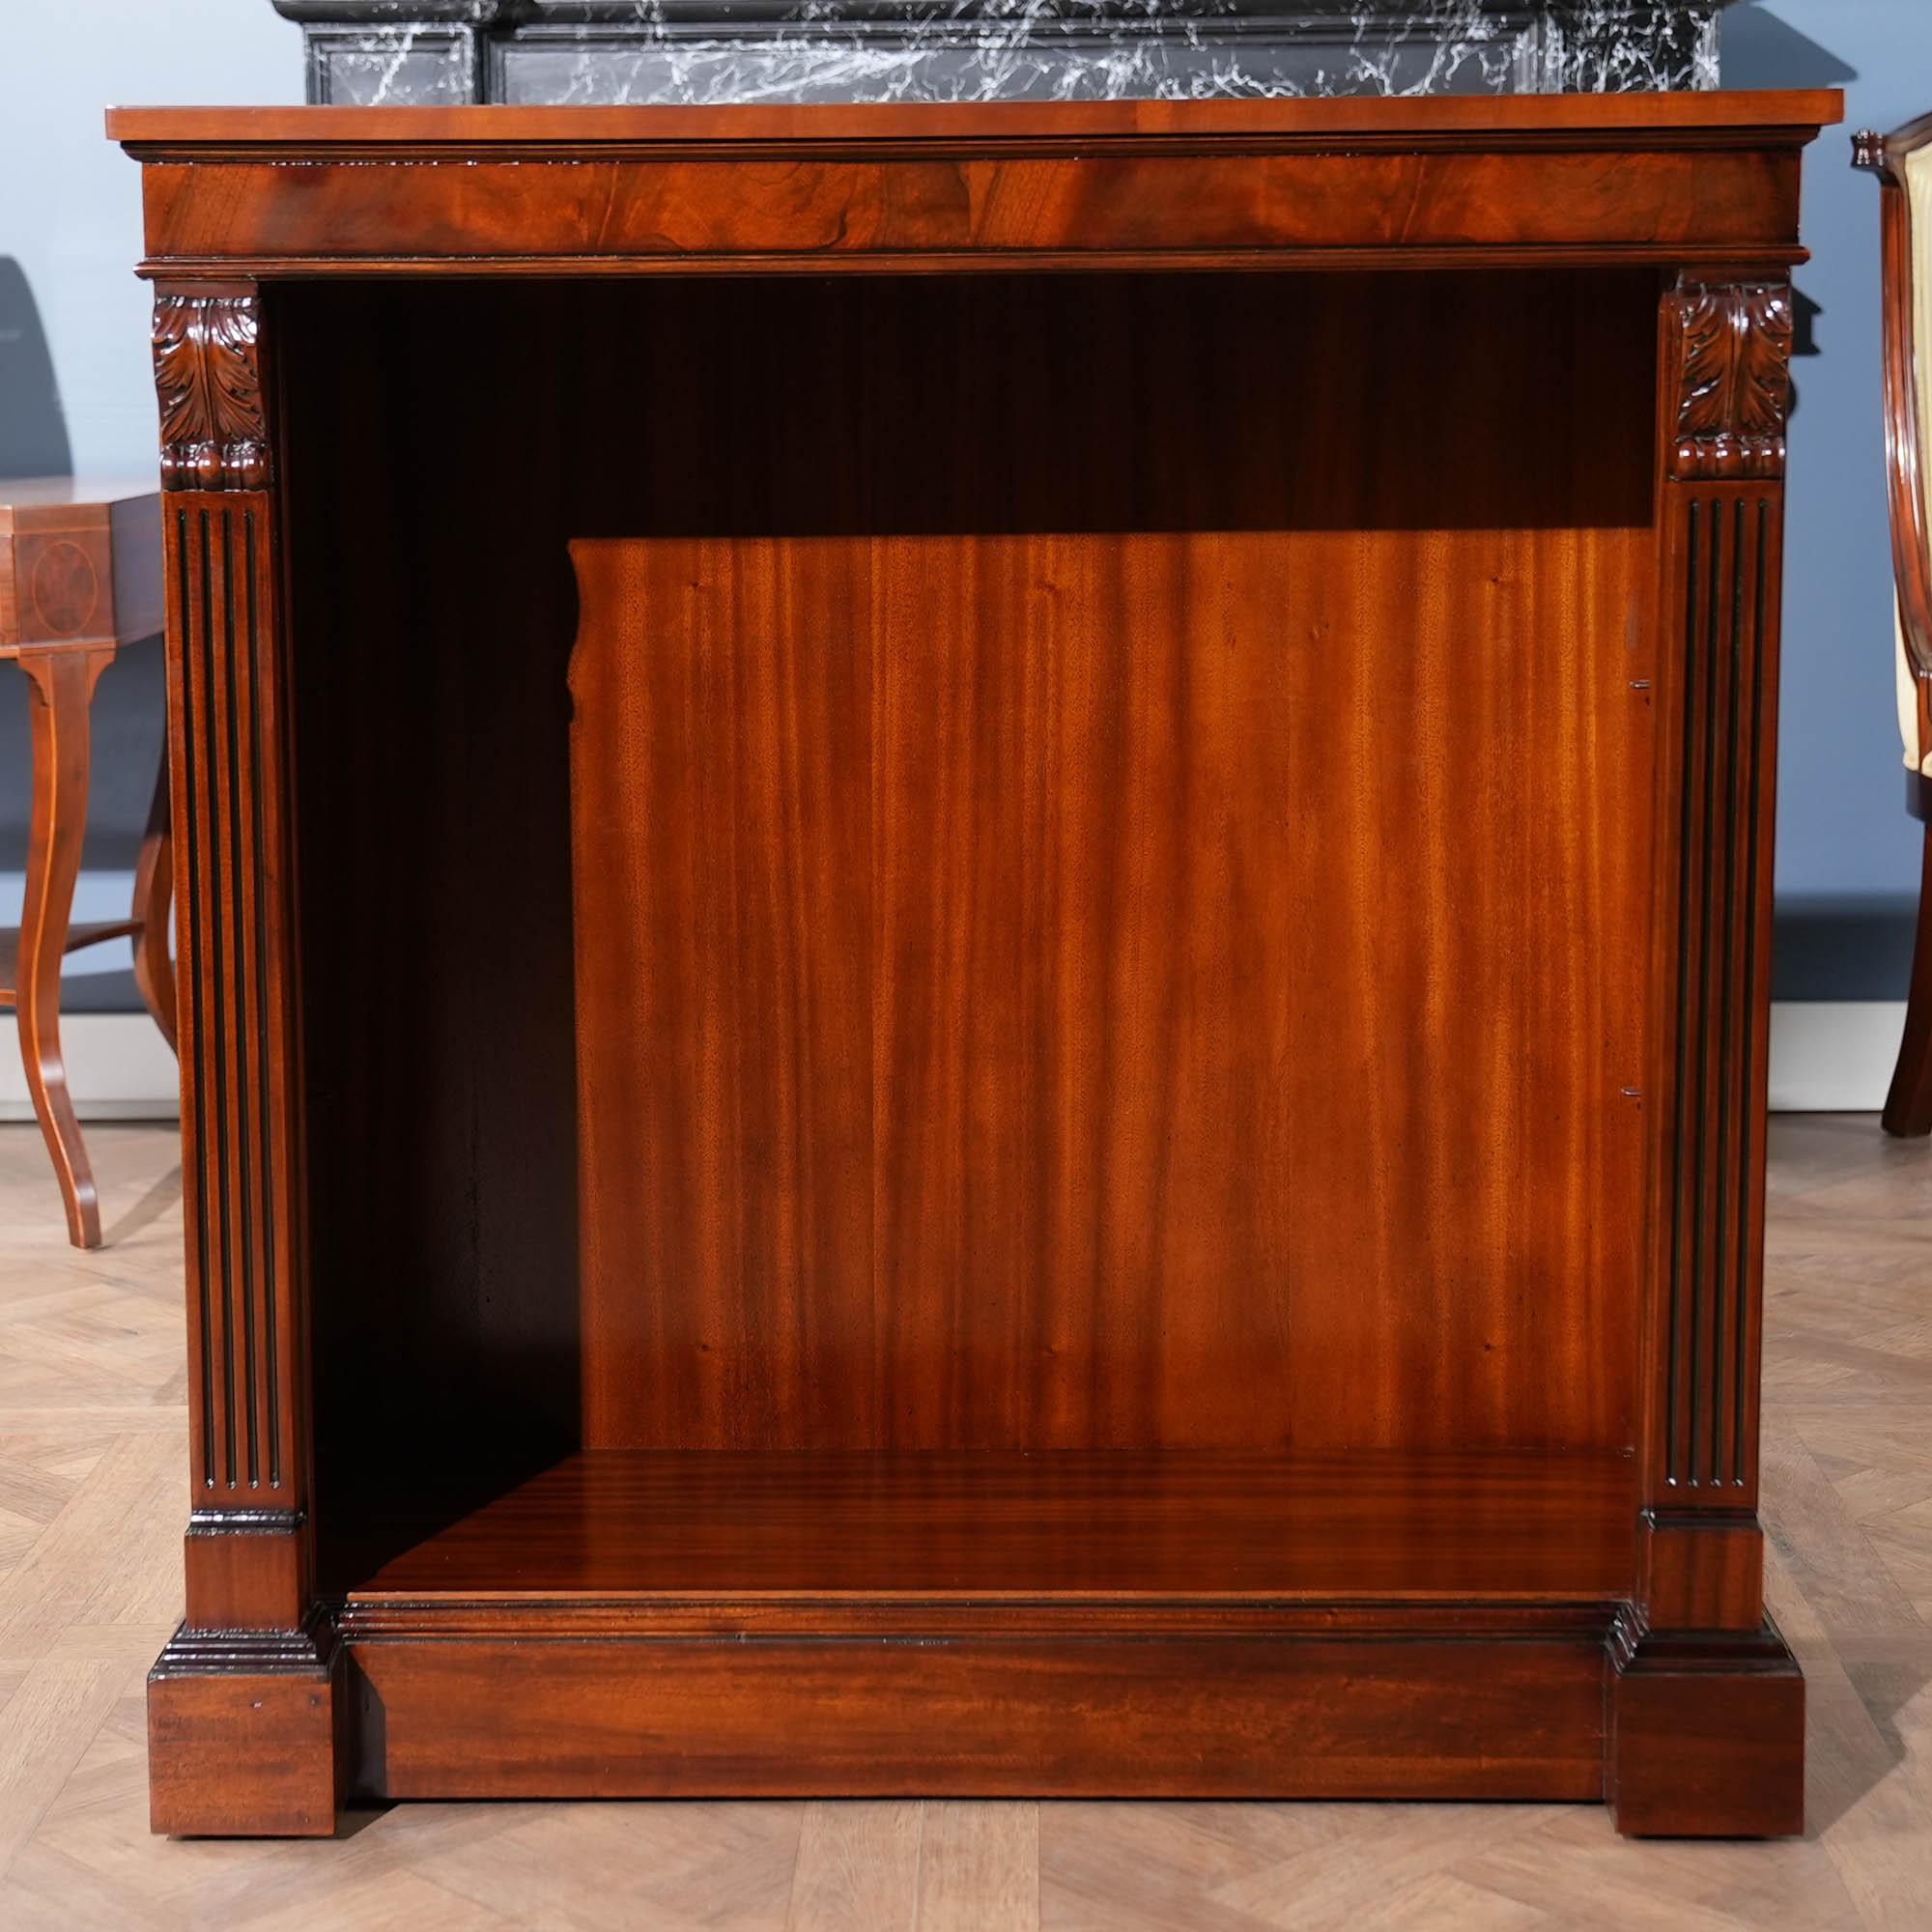 This is Niagara Furnitures’ Small Penhurst Mahogany Bookcase. The figural mahogany cornice is beautiful and adds a sense of depth to the upper area of the case while hand carved acanthus, solid mahogany brackets and reeded columns lend a sense of